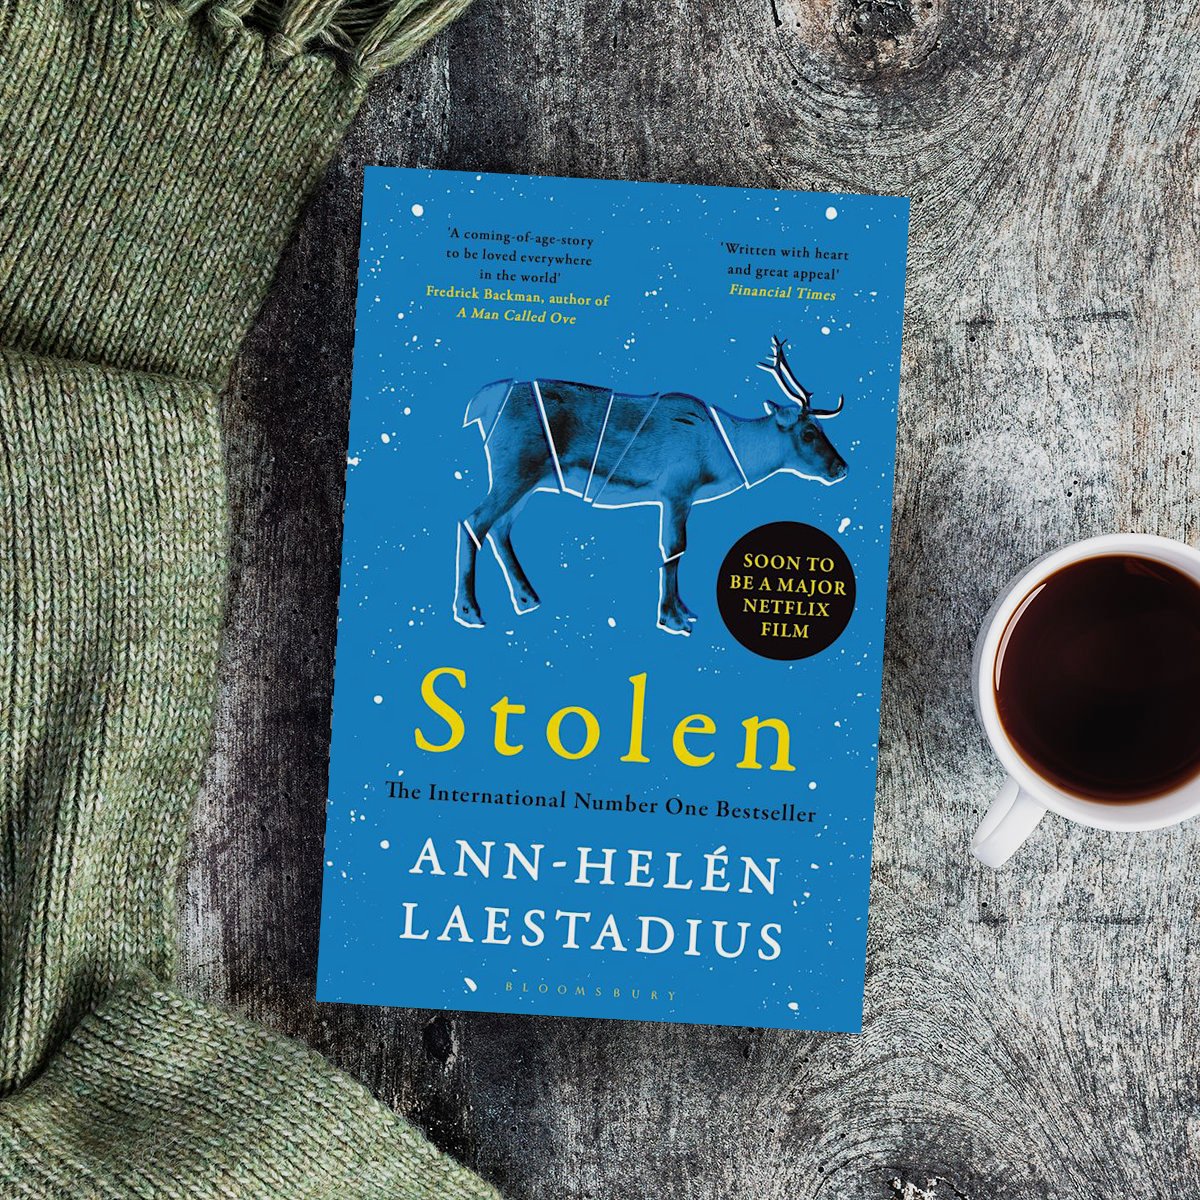 🌨️ 'A coming-of-age-story to be loved everywhere in the world' FREDRIK BACKMAN The international sensation and soon to be a Netflix adaptation, Stolen is the story of a young Sámi girl's coming-of-age, and a powerful fable about family, identity and justice.